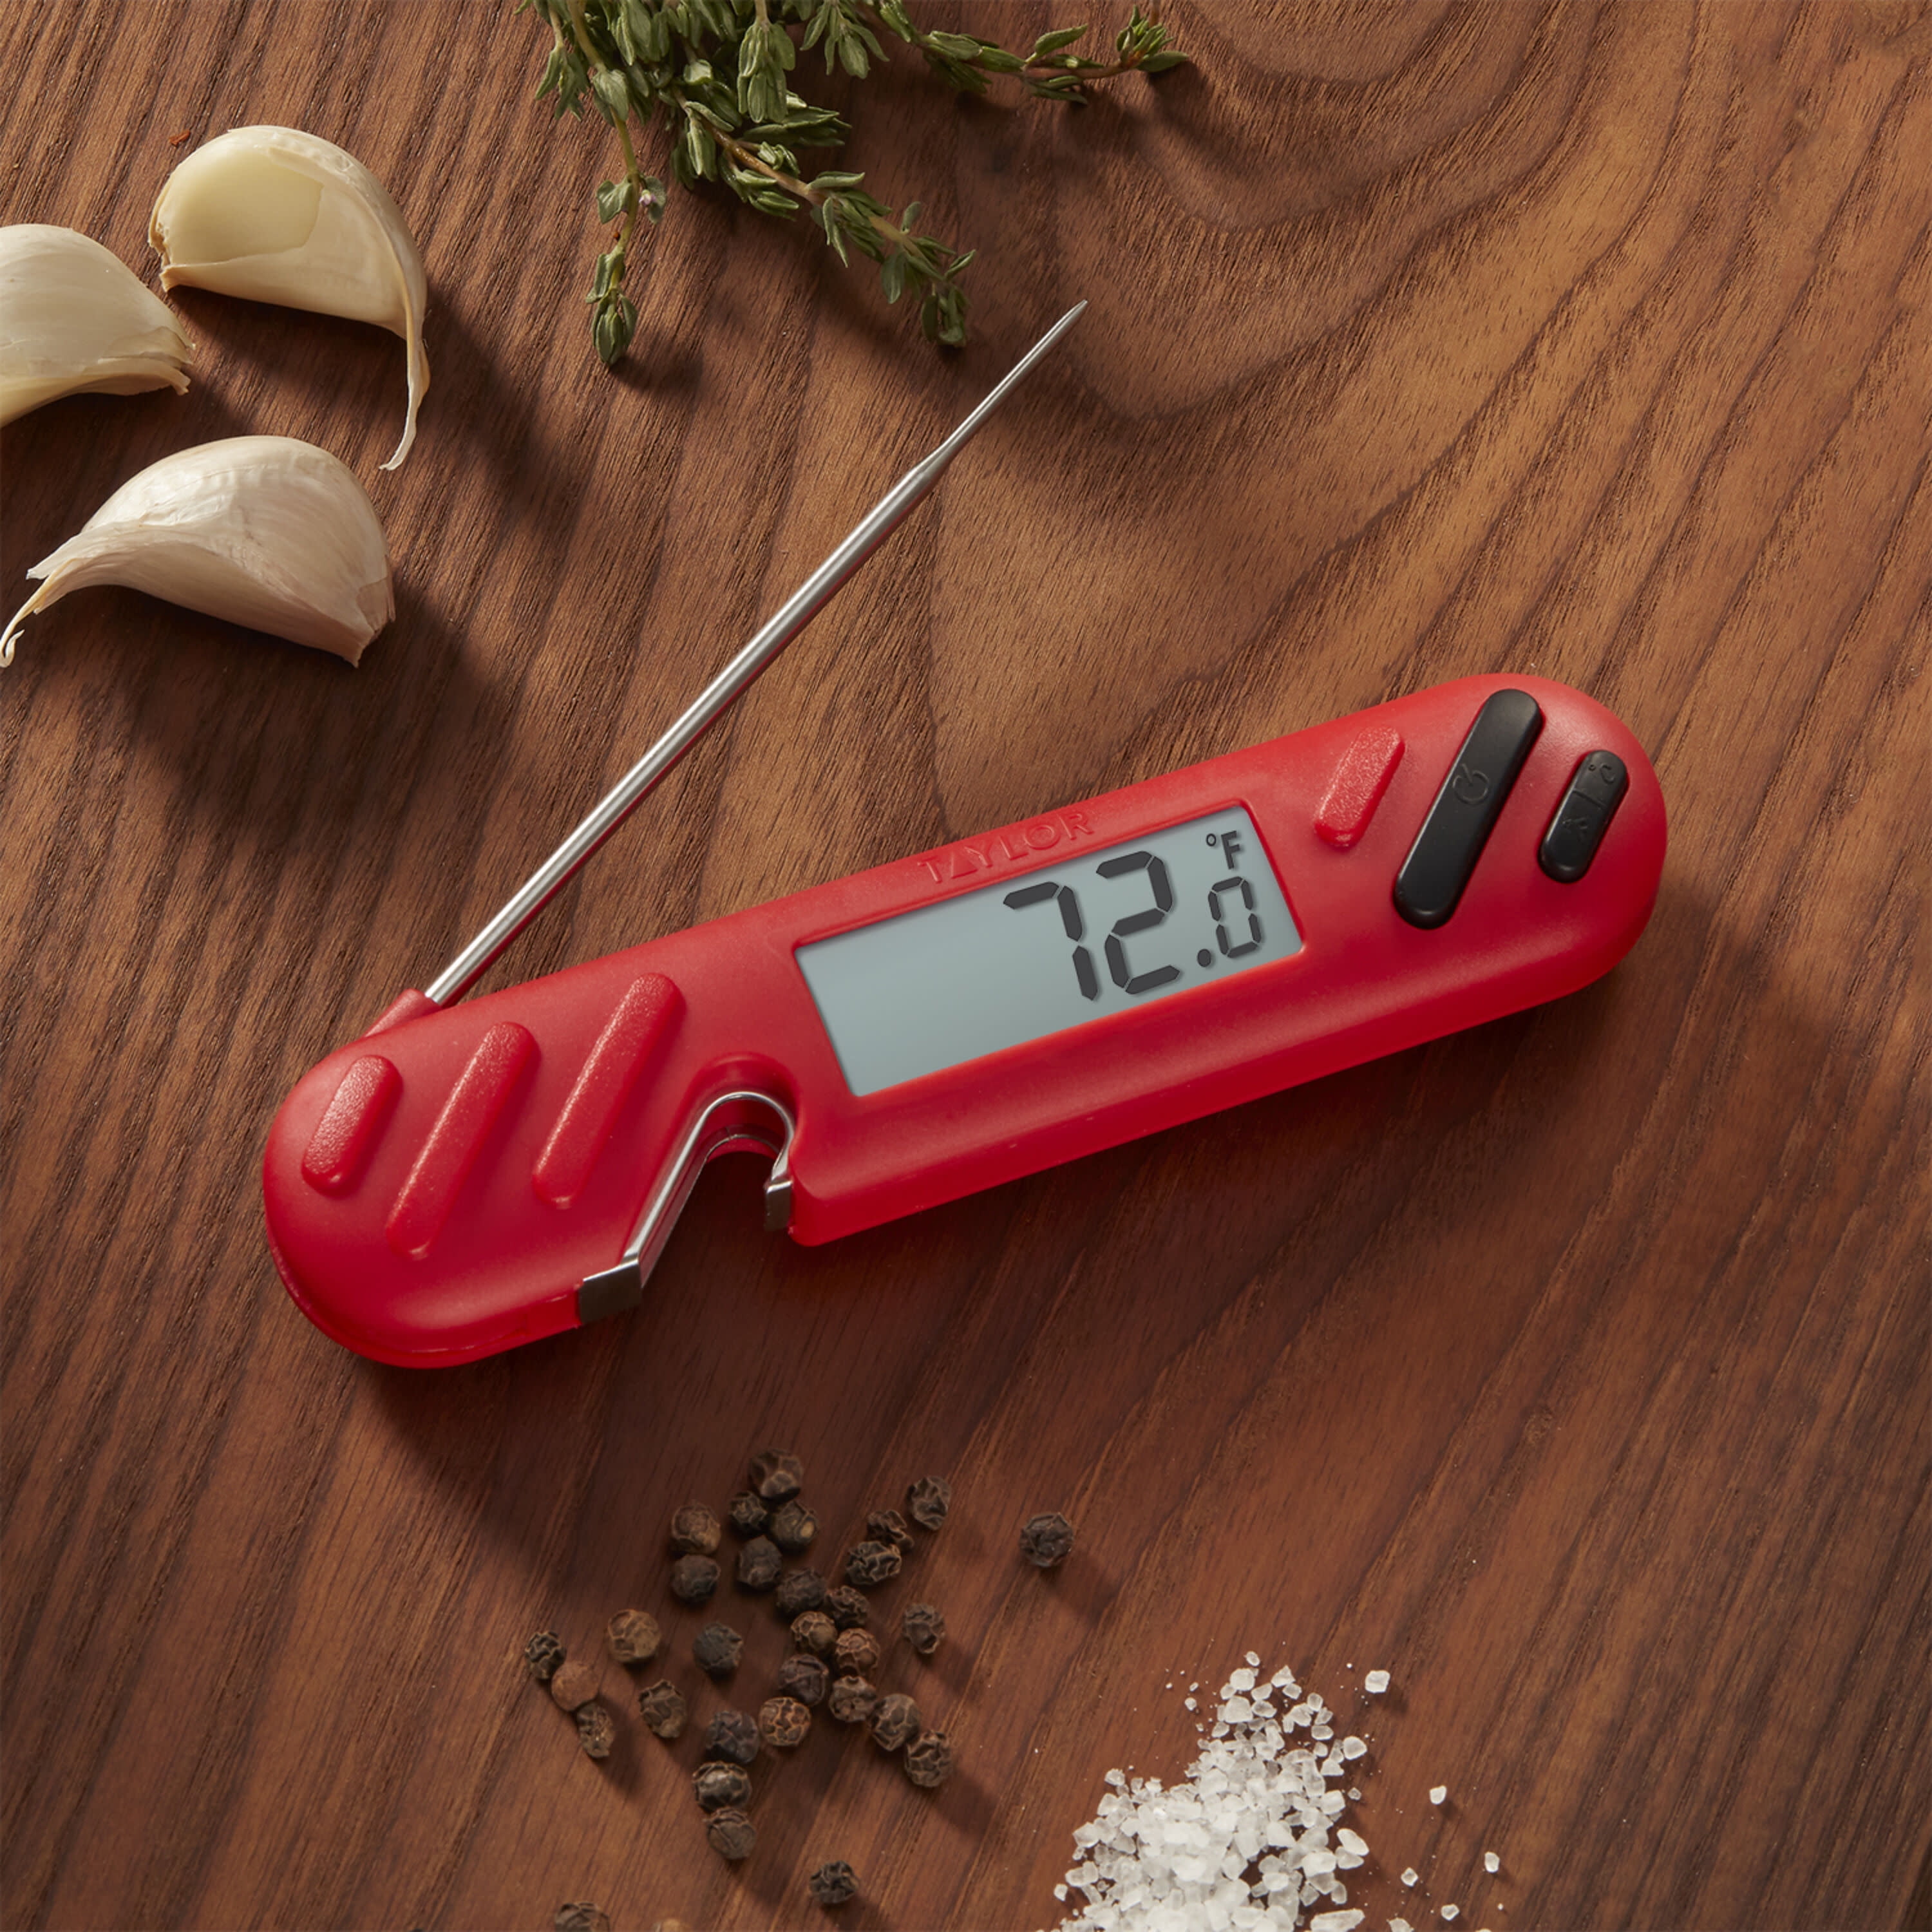 Taylor 1476FDA 2 7/8 Digital Compact Folding Probe Thermometer with Magnet